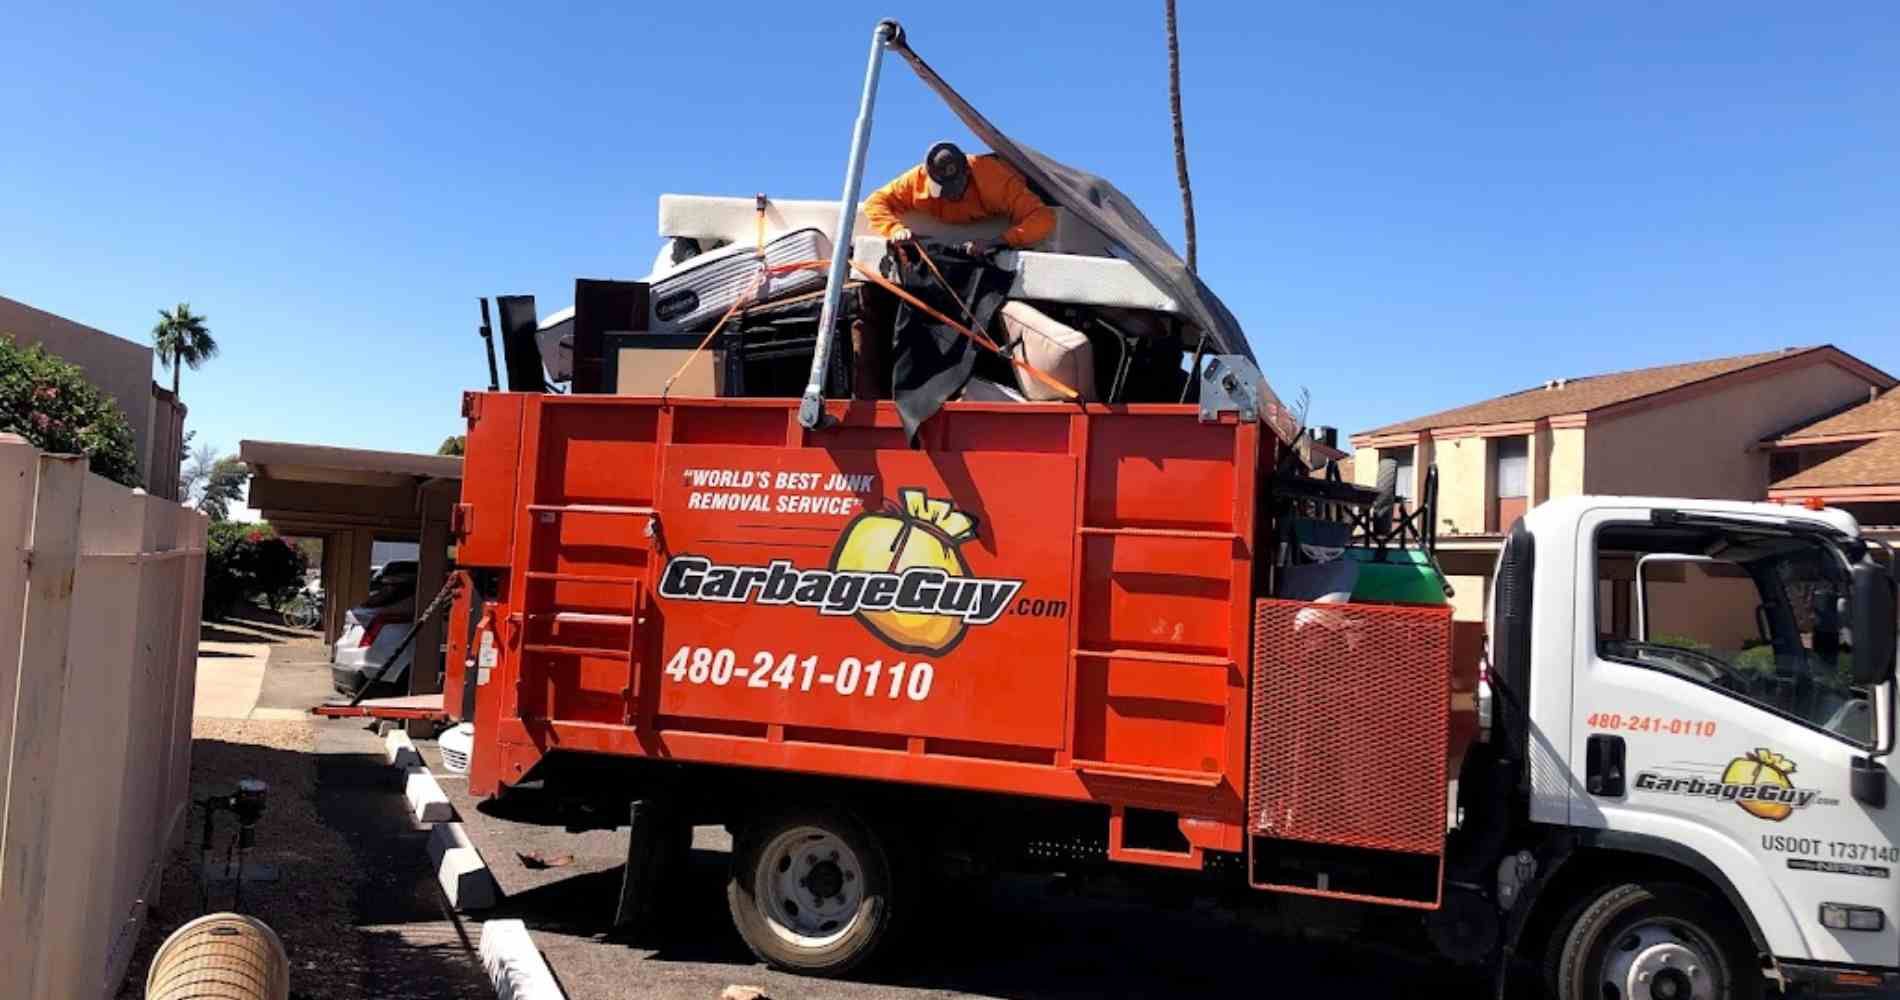 #1 for Furniture Removal in Surprise, AZ With Over 1200 5-Star Reviews!